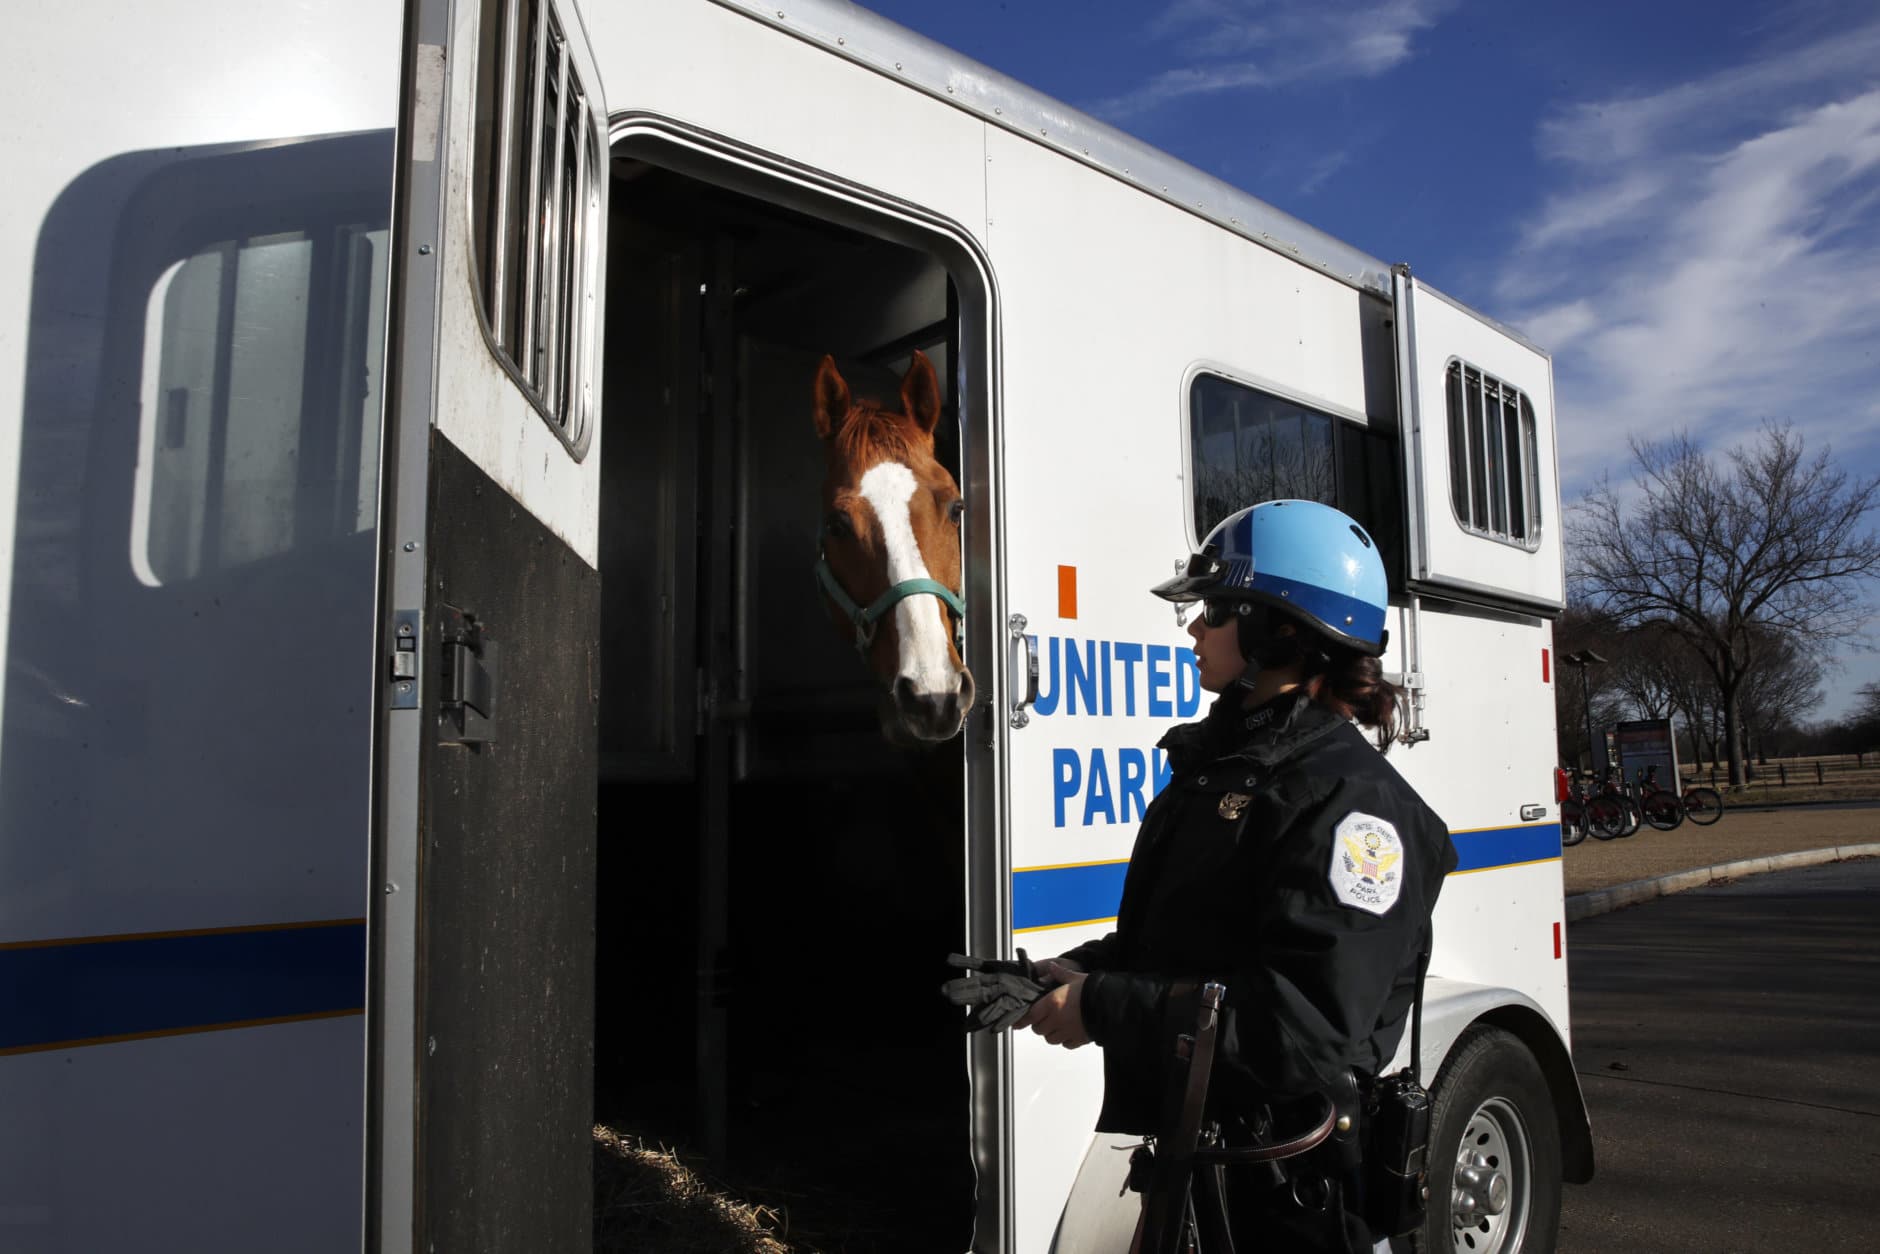 Park Police Horse Mounted Patrol Unit Officer Baum, who is working without pay due to the government shutdown, puts Monty into a horse trailer at the end of their day, across from the Martin Luther King Jr. Memorial, Thursday, Dec. 27, 2018, in Washington, during a partial government shutdown. President Donald Trump has vowed to hold the line on his budget demand, telling reporters during his visit to Iraq Wednesday that he'll do "whatever it takes" to get money for border security. The White House and congressional Democrats have been talking but to little effect. Washington area national parks will remain open during the partial government shutdown, but without visitor center services. (AP Photo/Jacquelyn Martin)